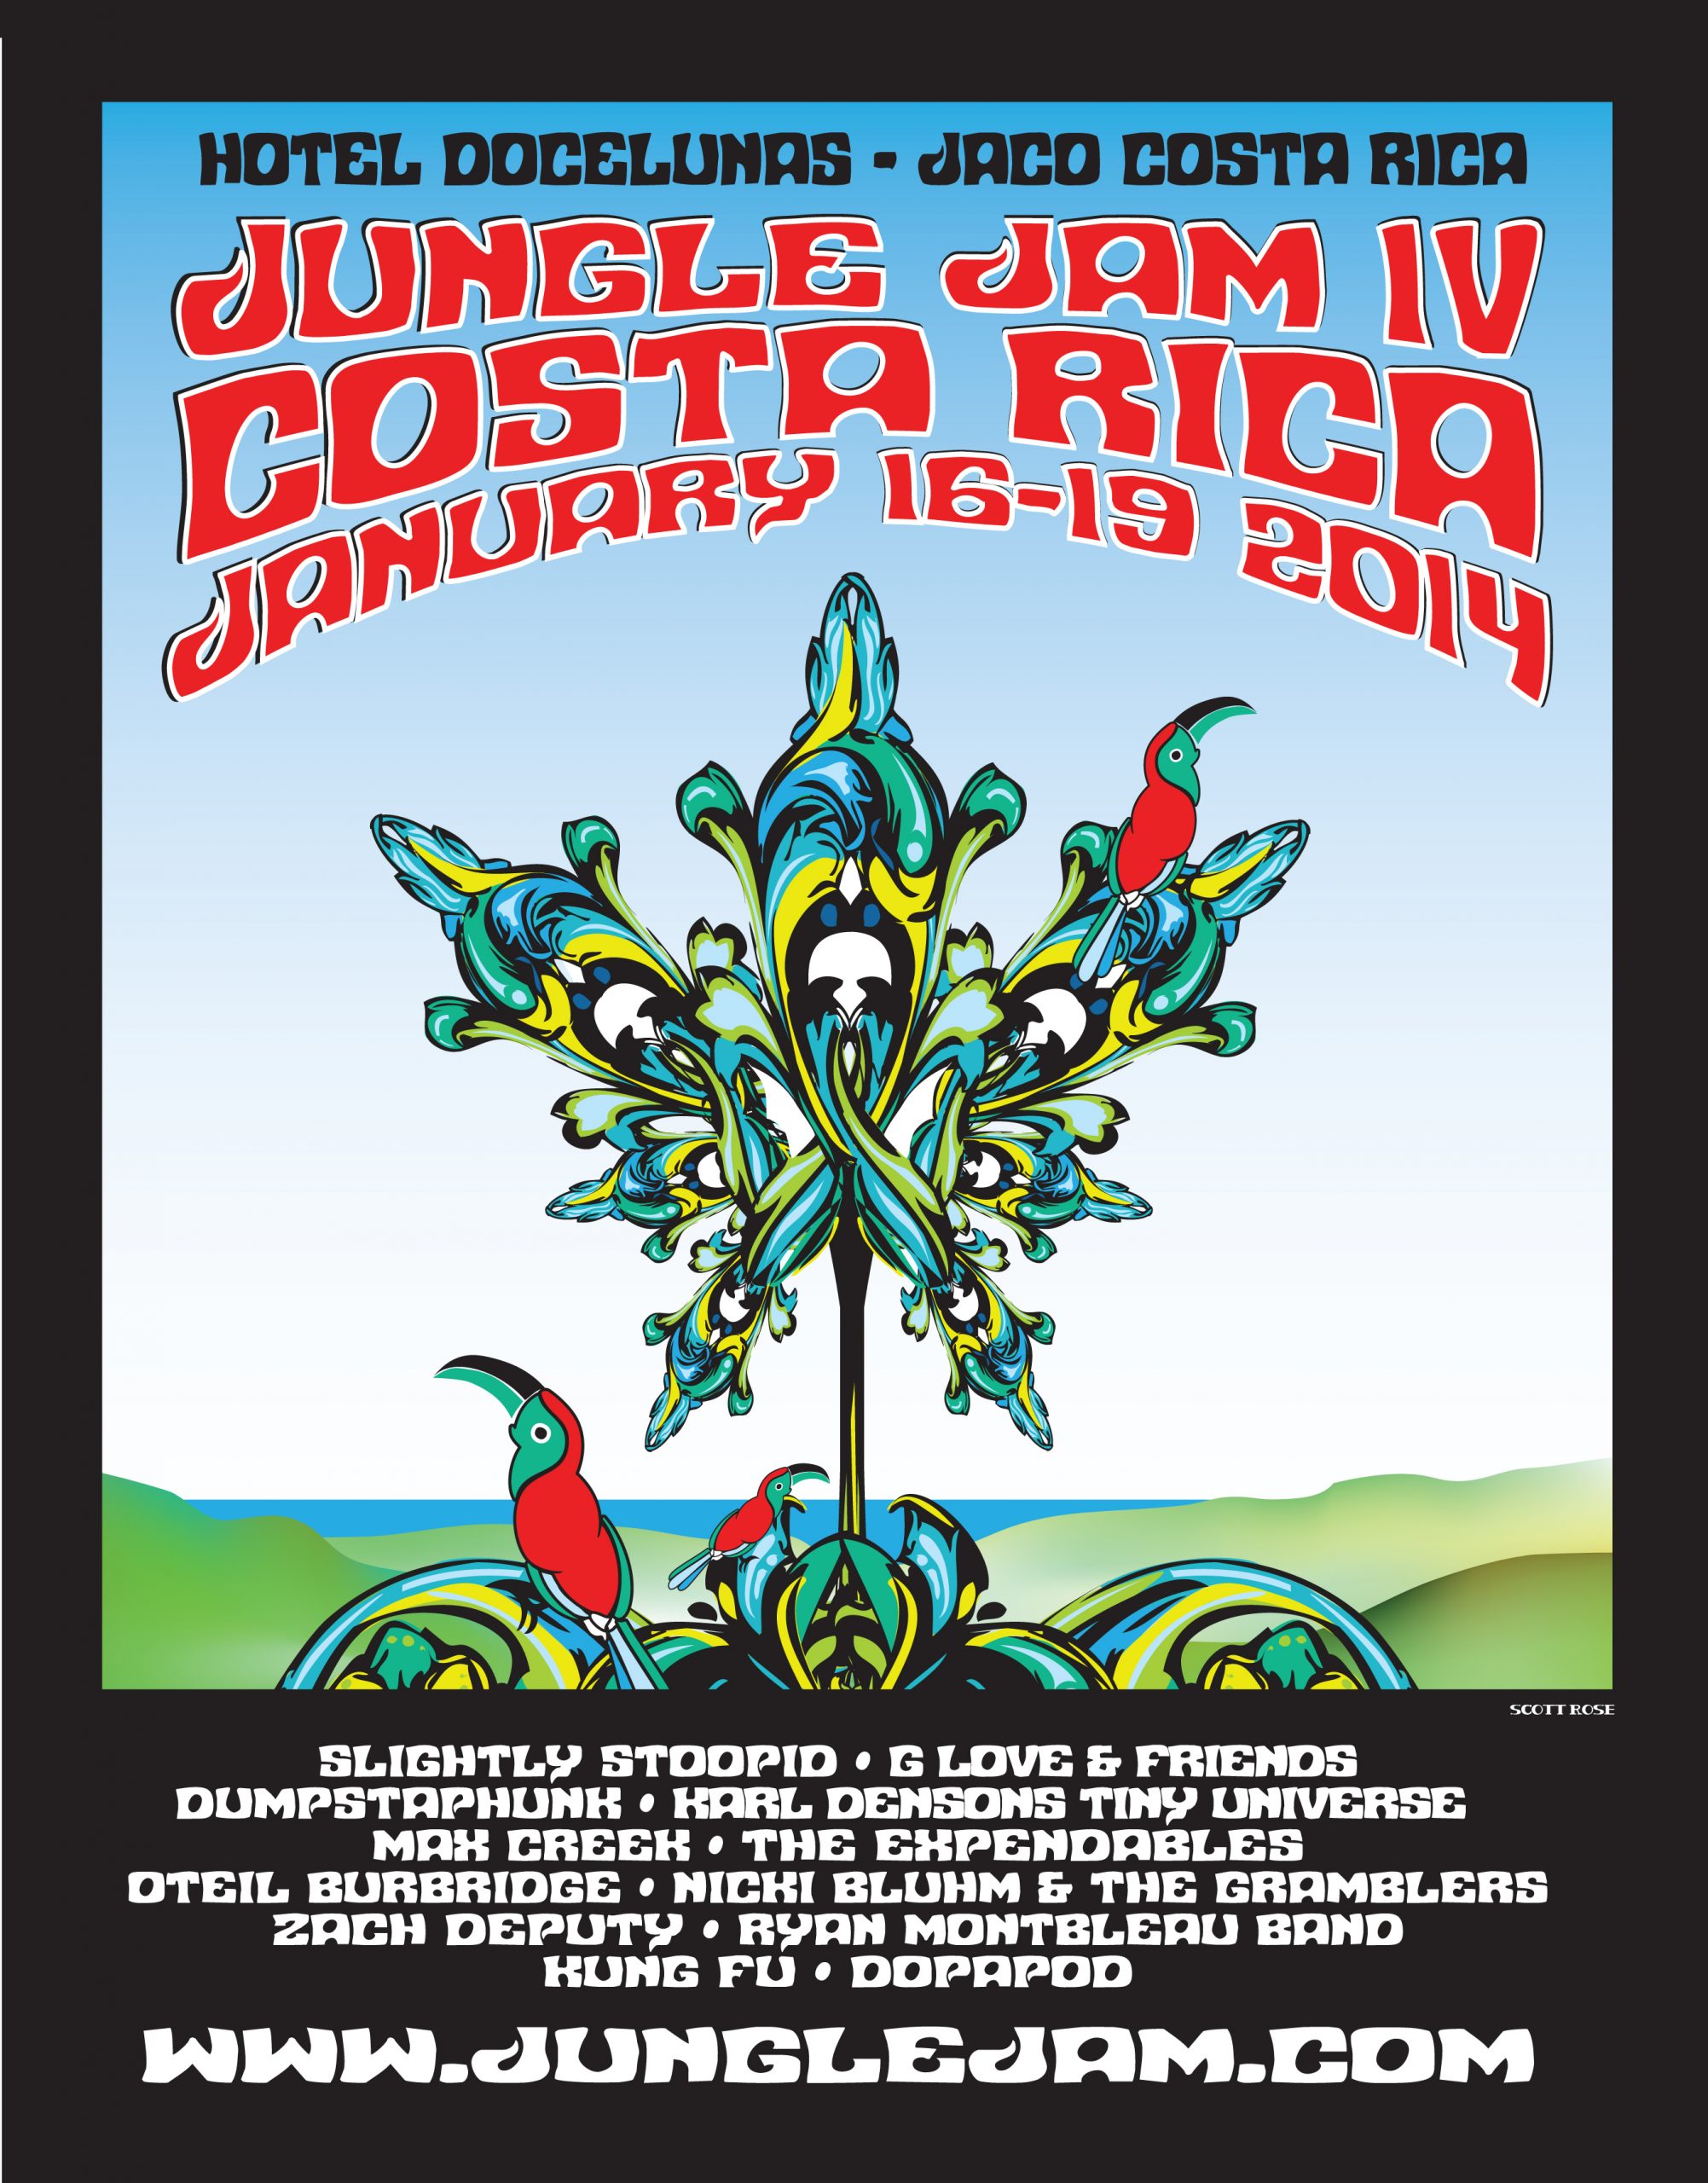 Exclusive Interview with Founder of Jungle Jam – Costa Rica, Jan. 16-19 2014